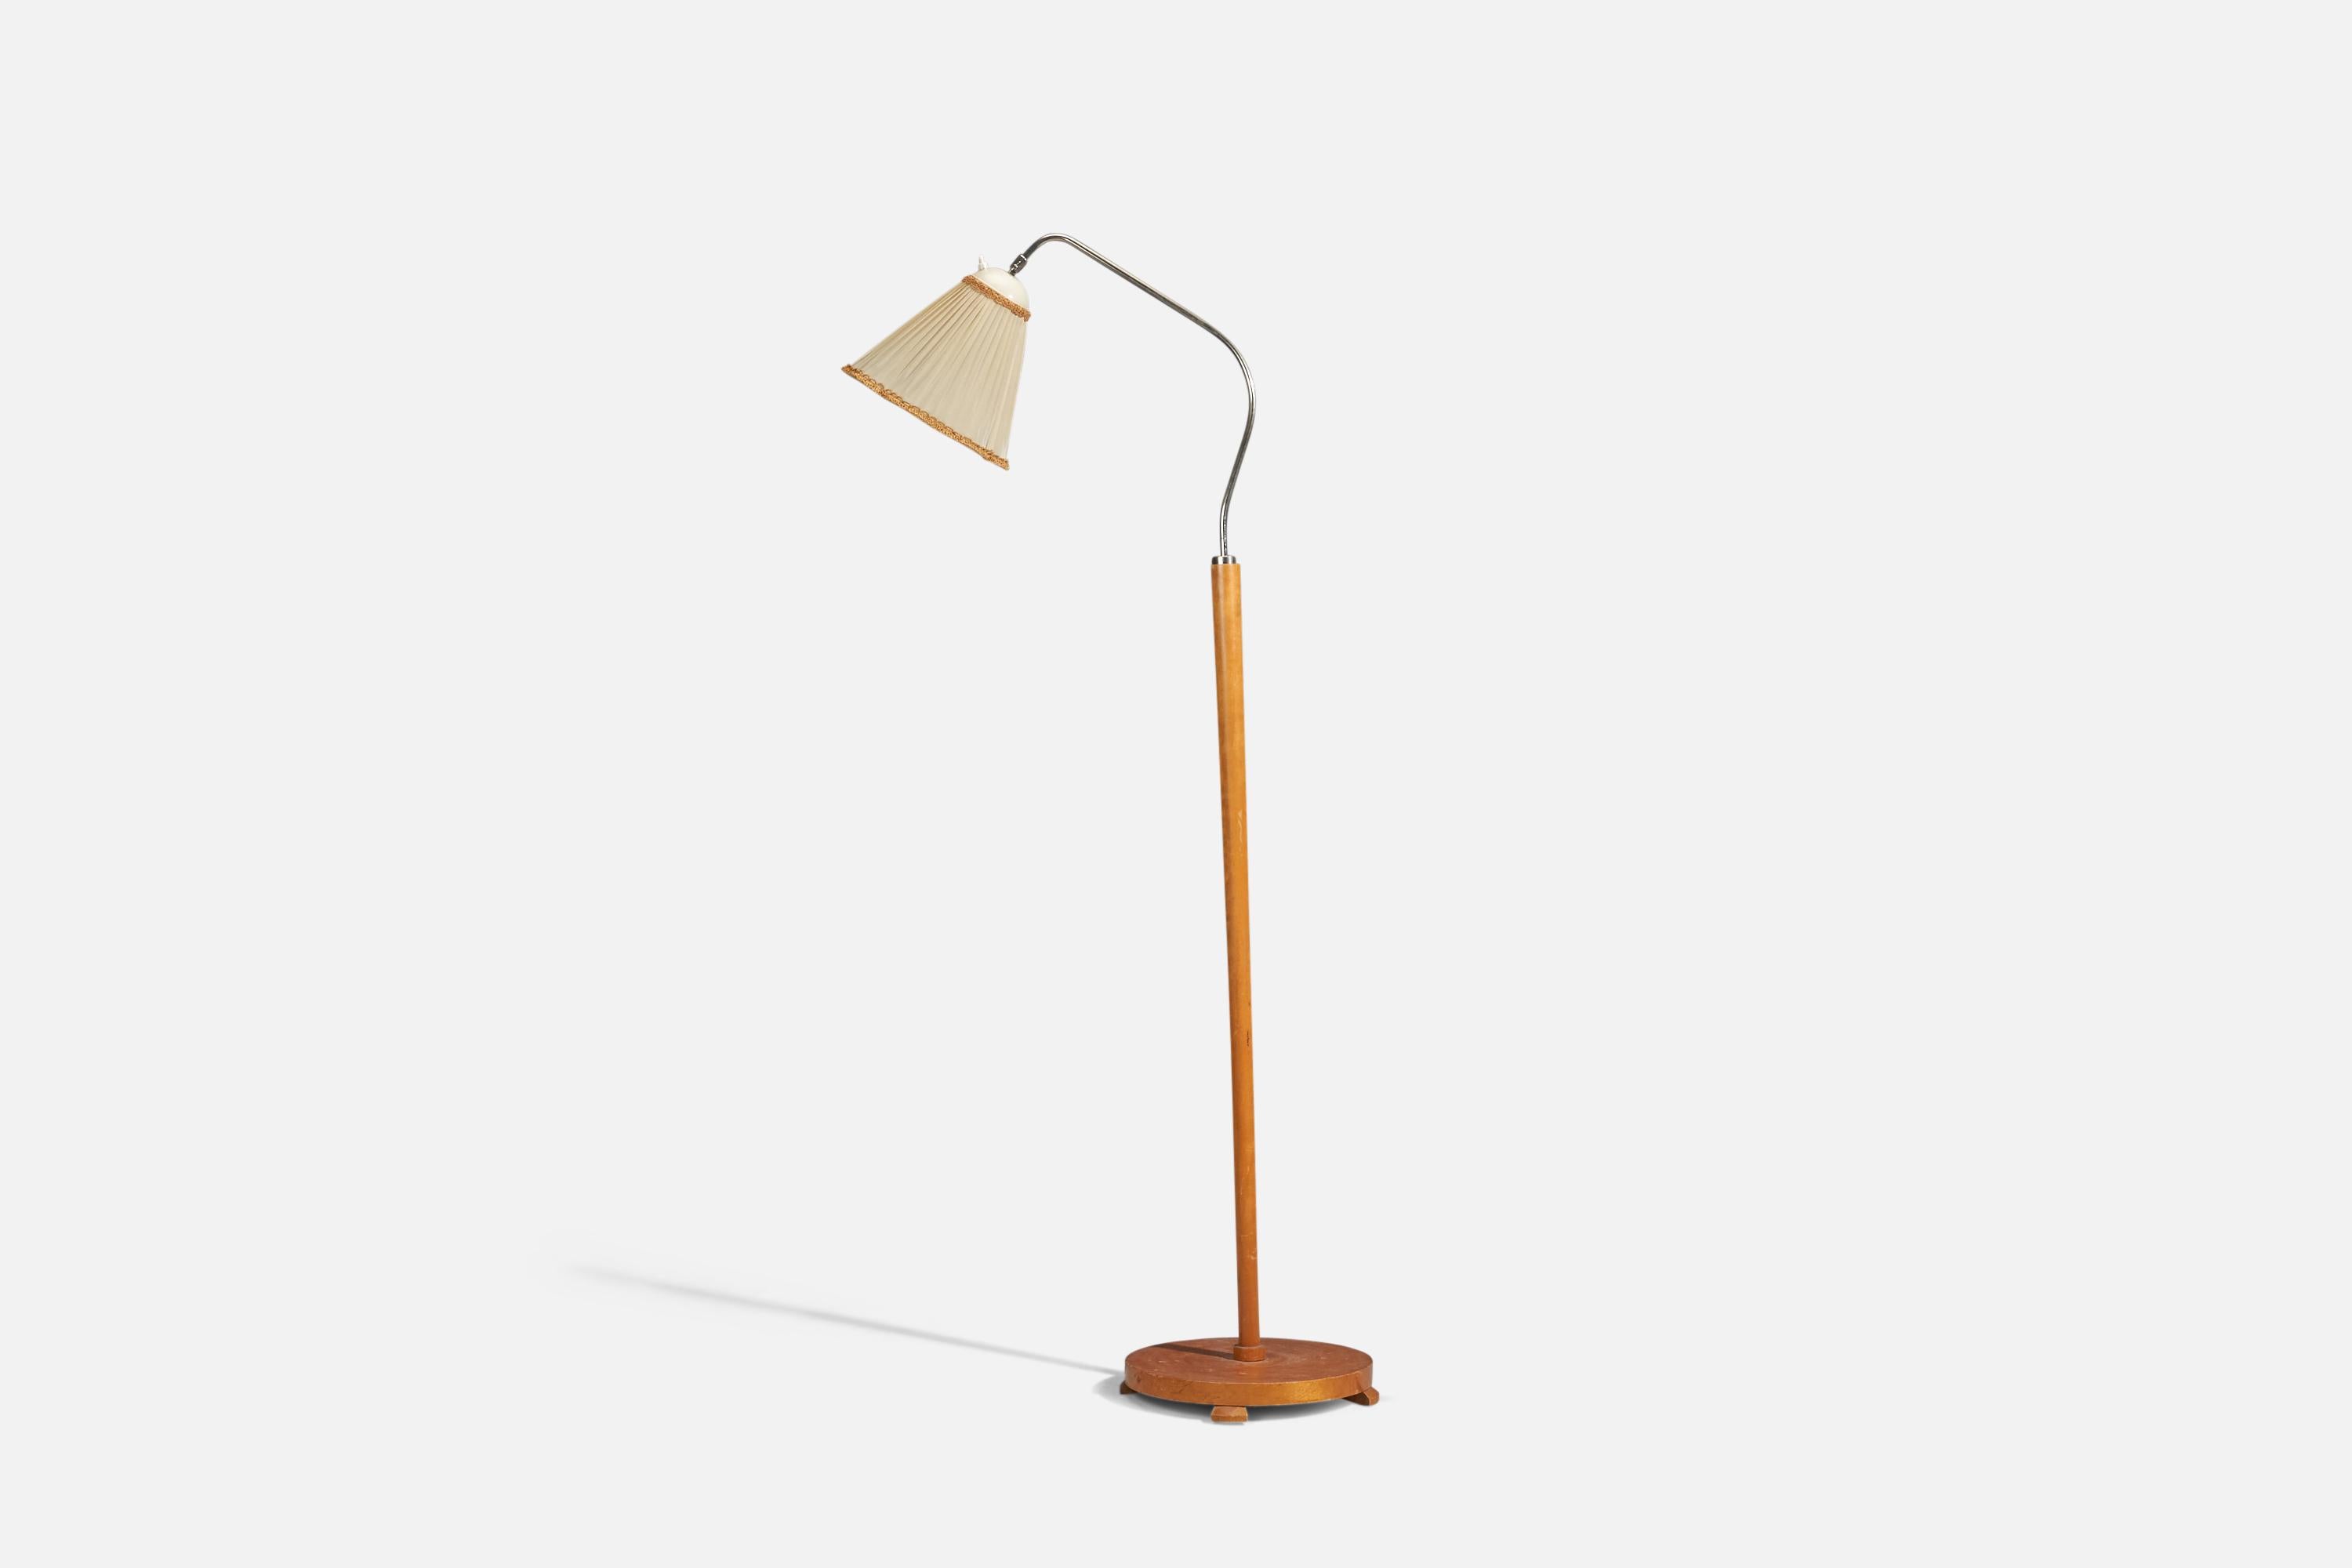 An adjustable metal and wood floor lamp designed and produced in Sweden, 1940s.

Dimensions variable, measured as illustrated in first image.

Dimensions stated are of Floor Lamp with Lampshade. 

Socket takes standard E-26 medium base bulb.

There